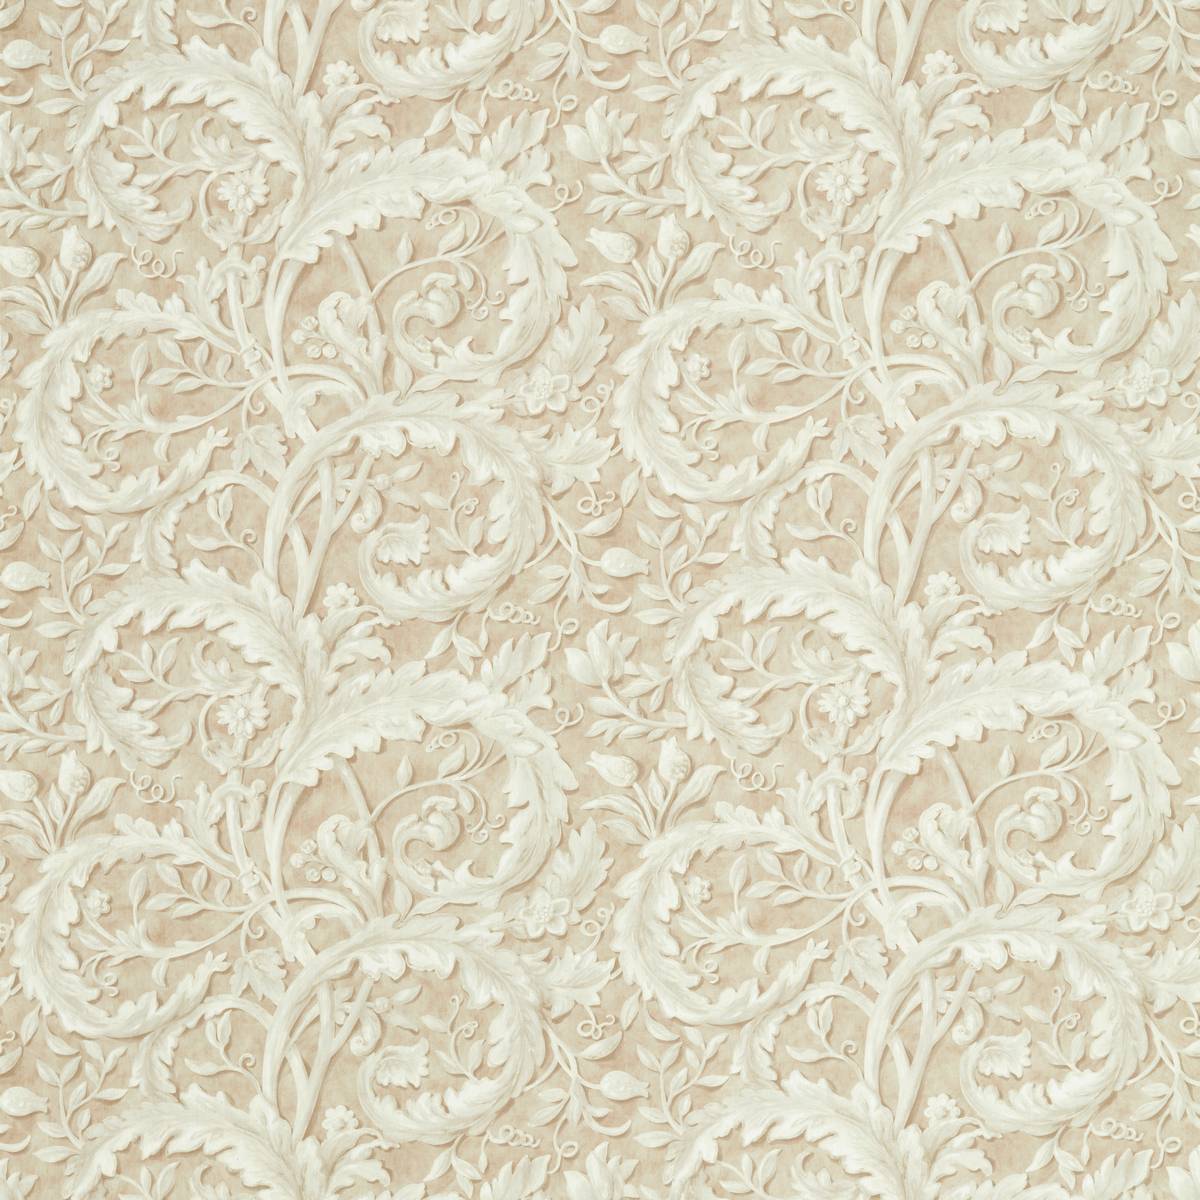 Tilia Lime Stone Fabric by Sanderson